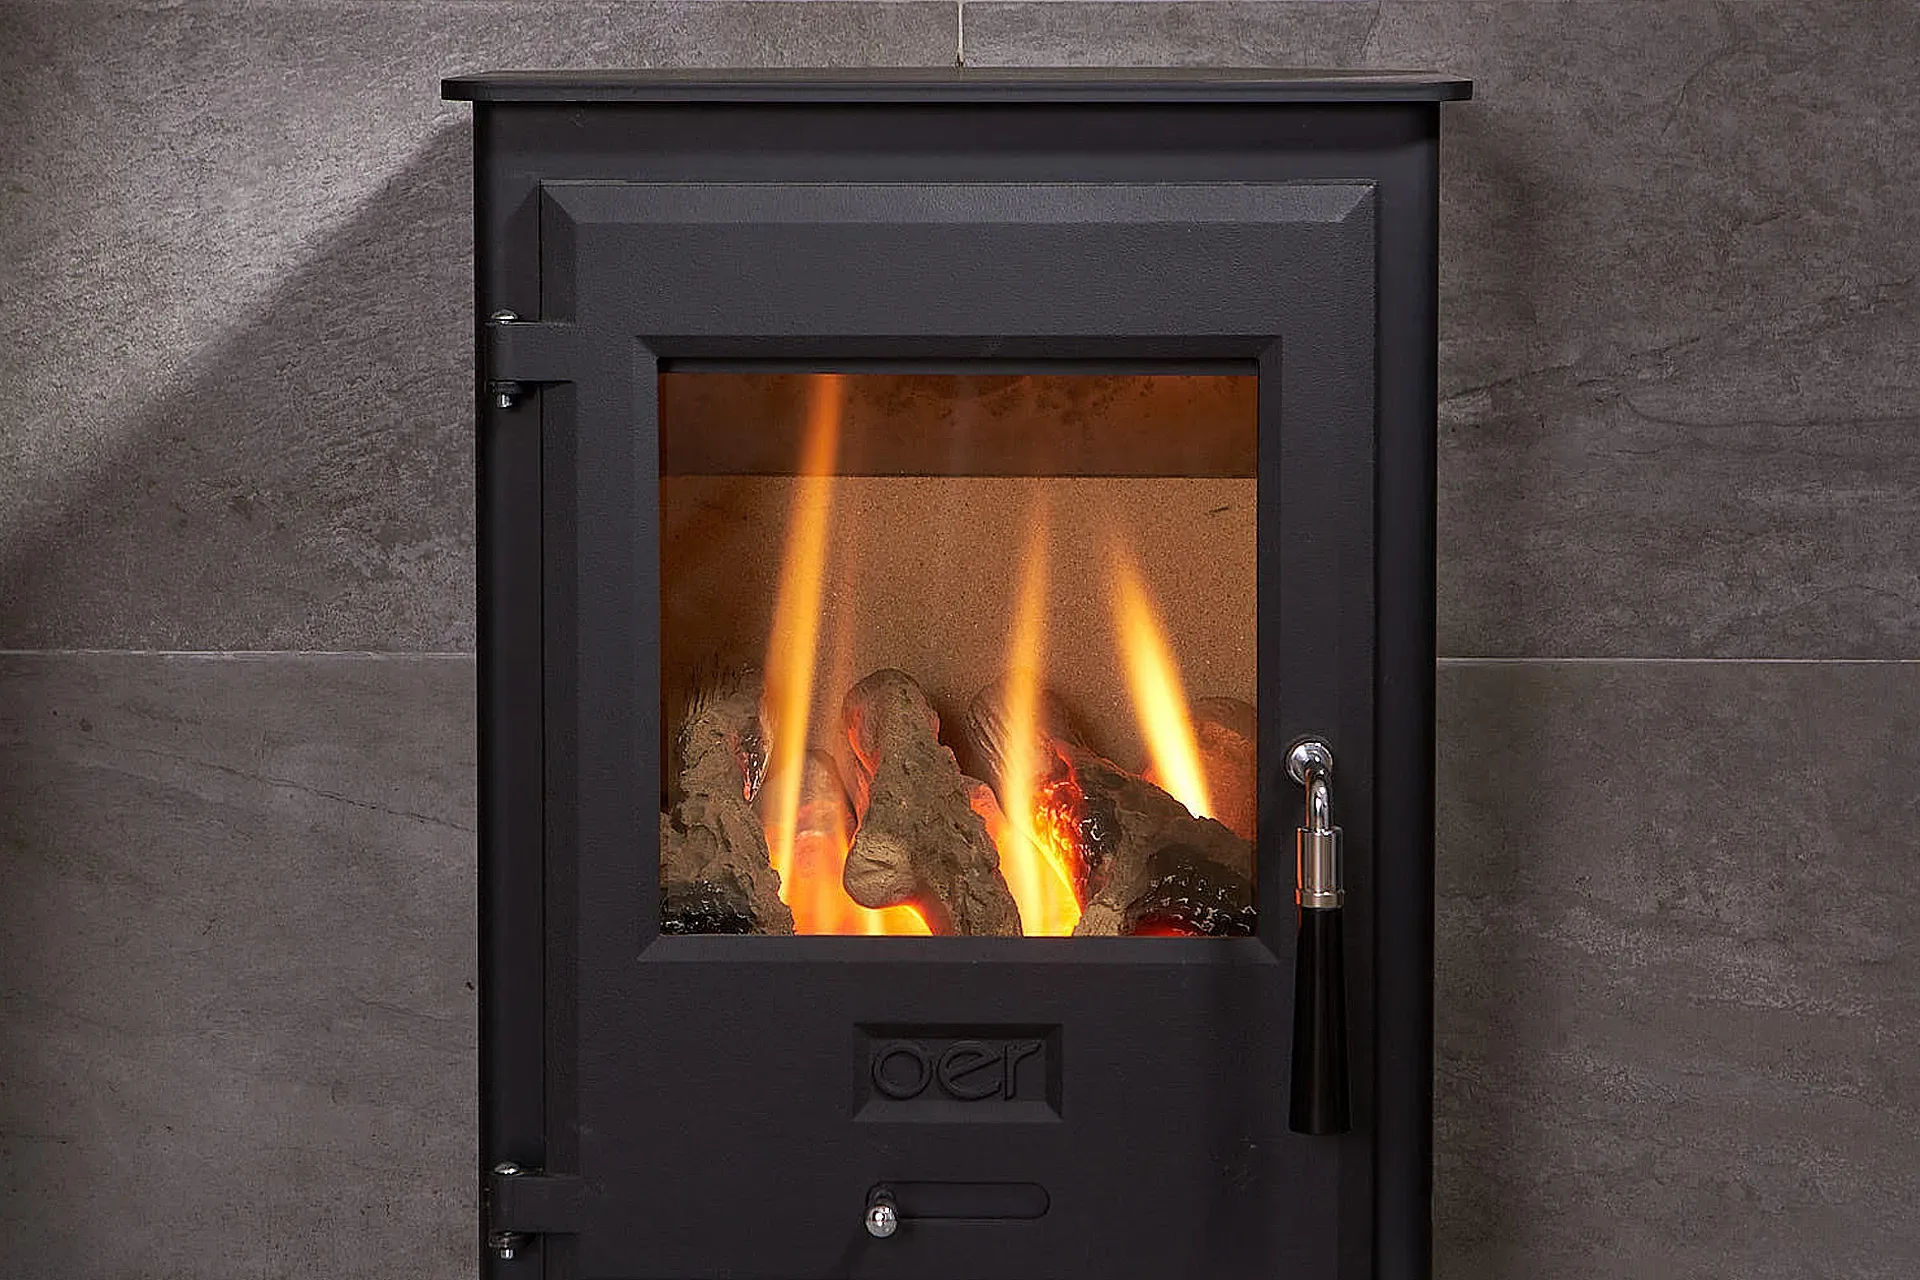 OER gas stove